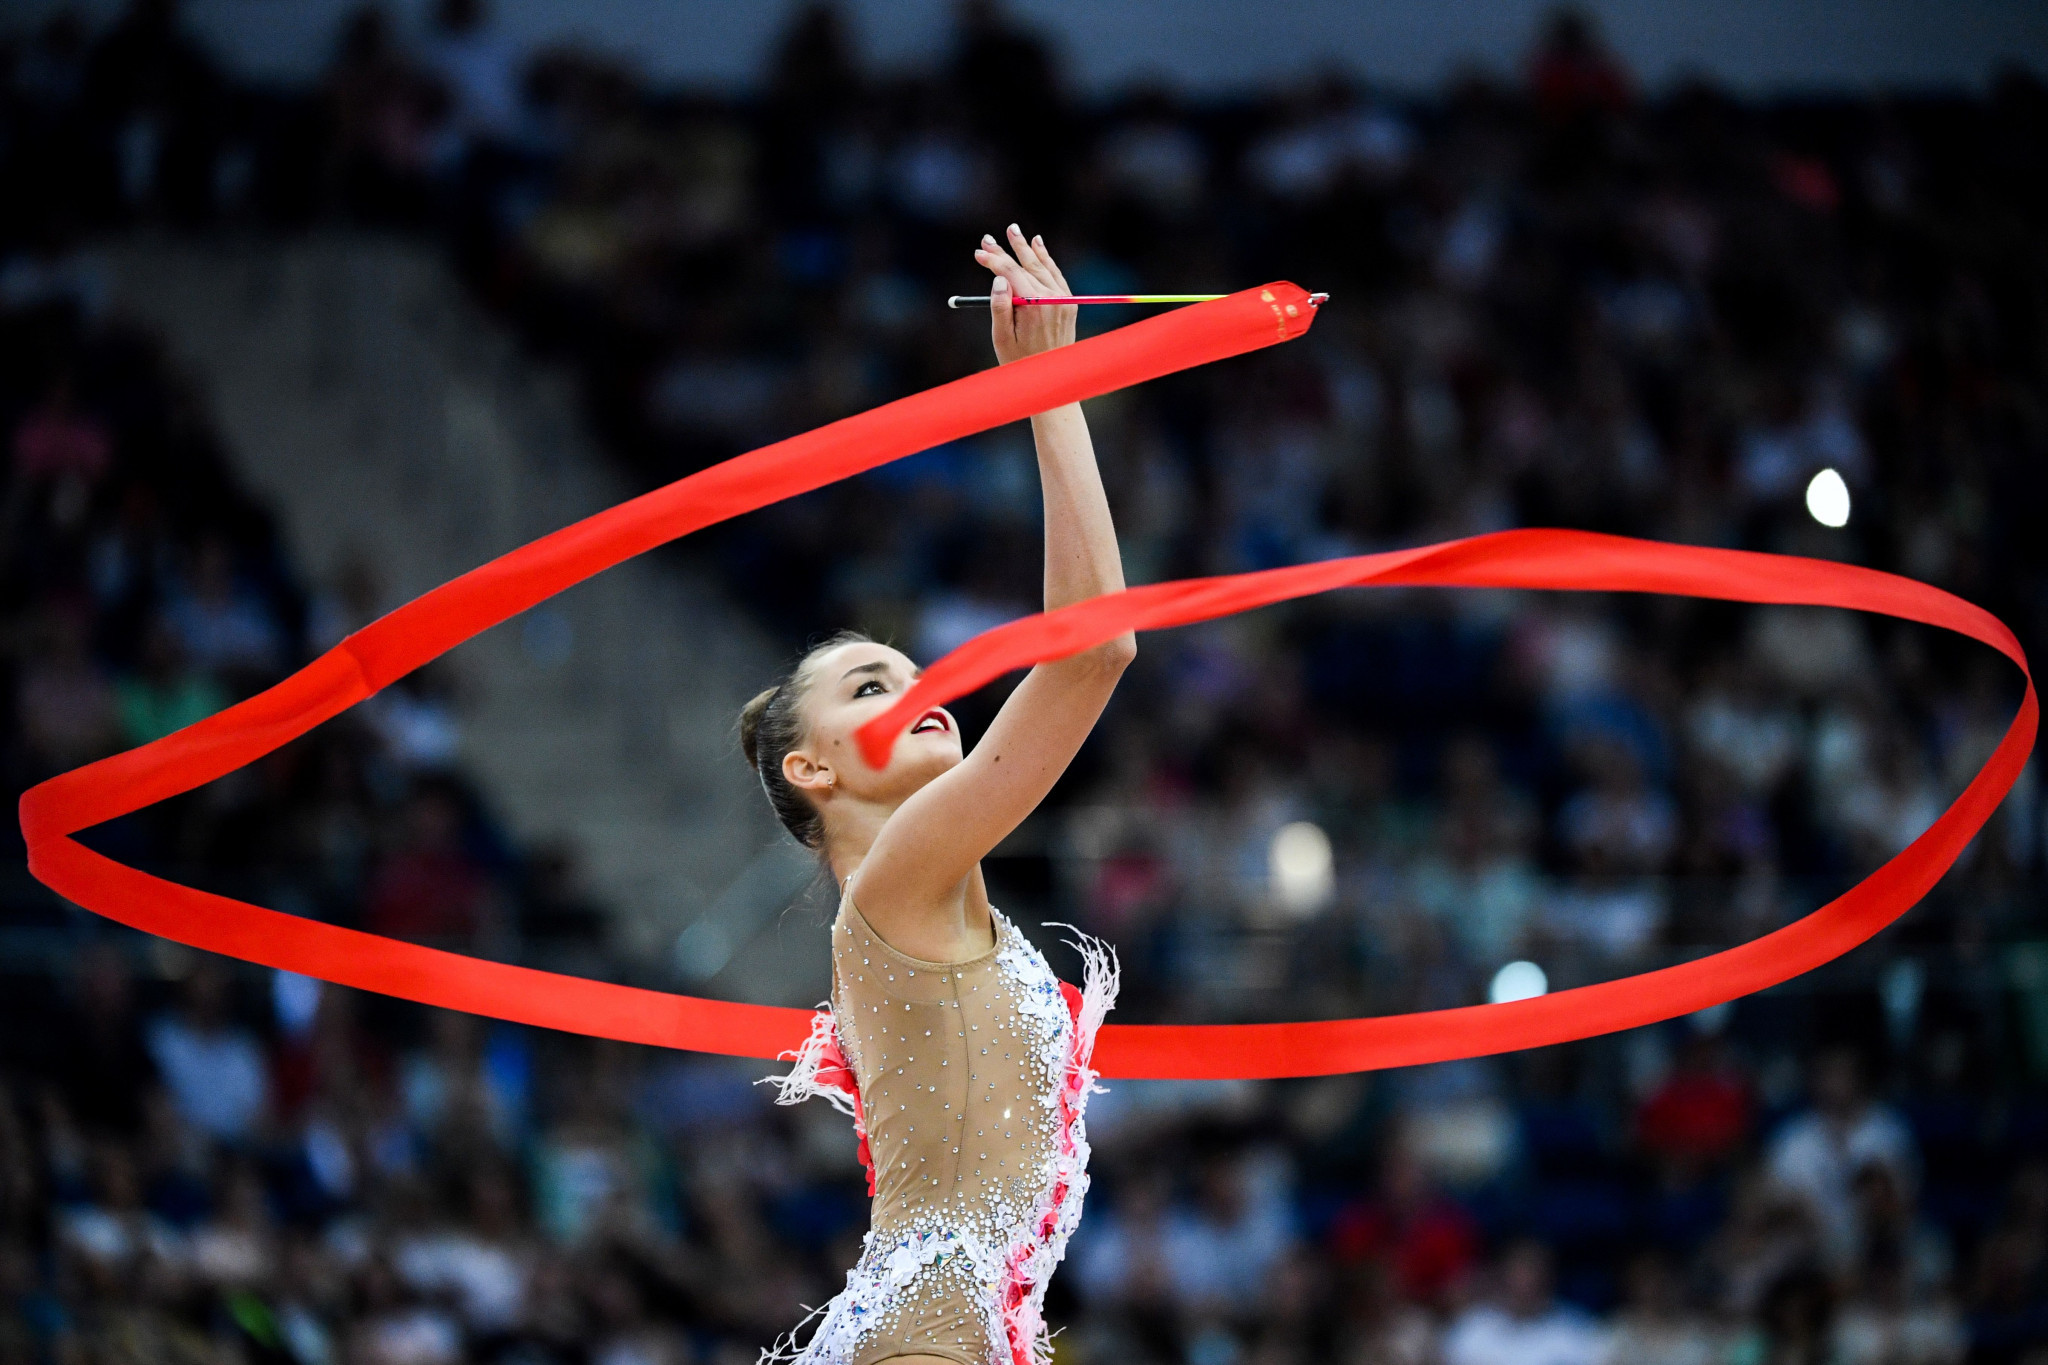 Dina Averina won all four individual disciplines today at the Rhythmic Gymnastics World Challenge Cup in Moscow ©Getty Images